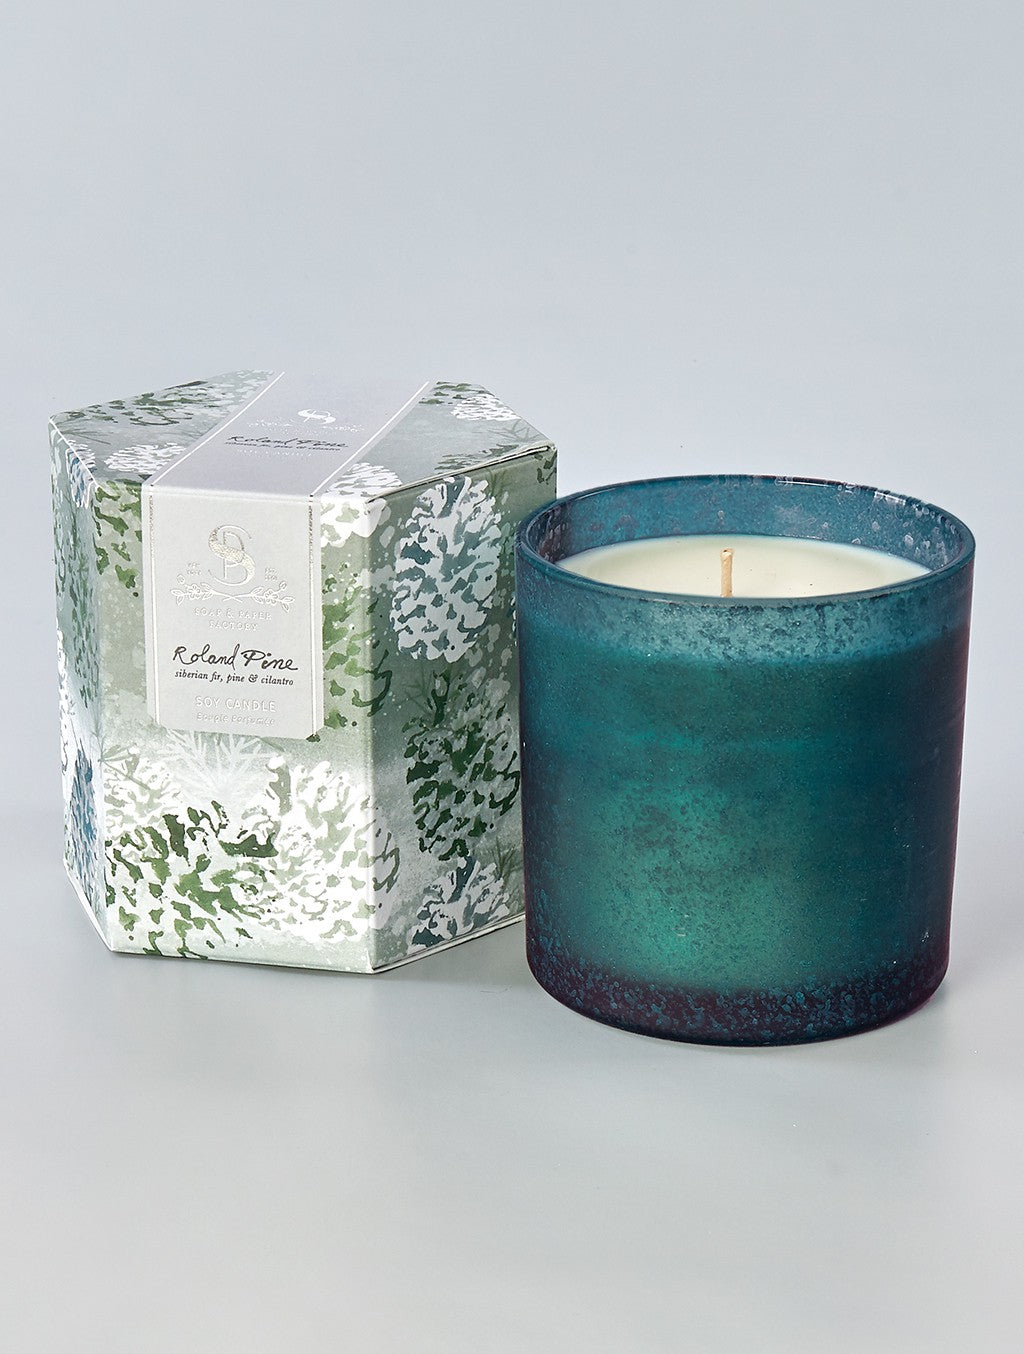 Roland Pine Artisan Soy Candle - 15.5oz